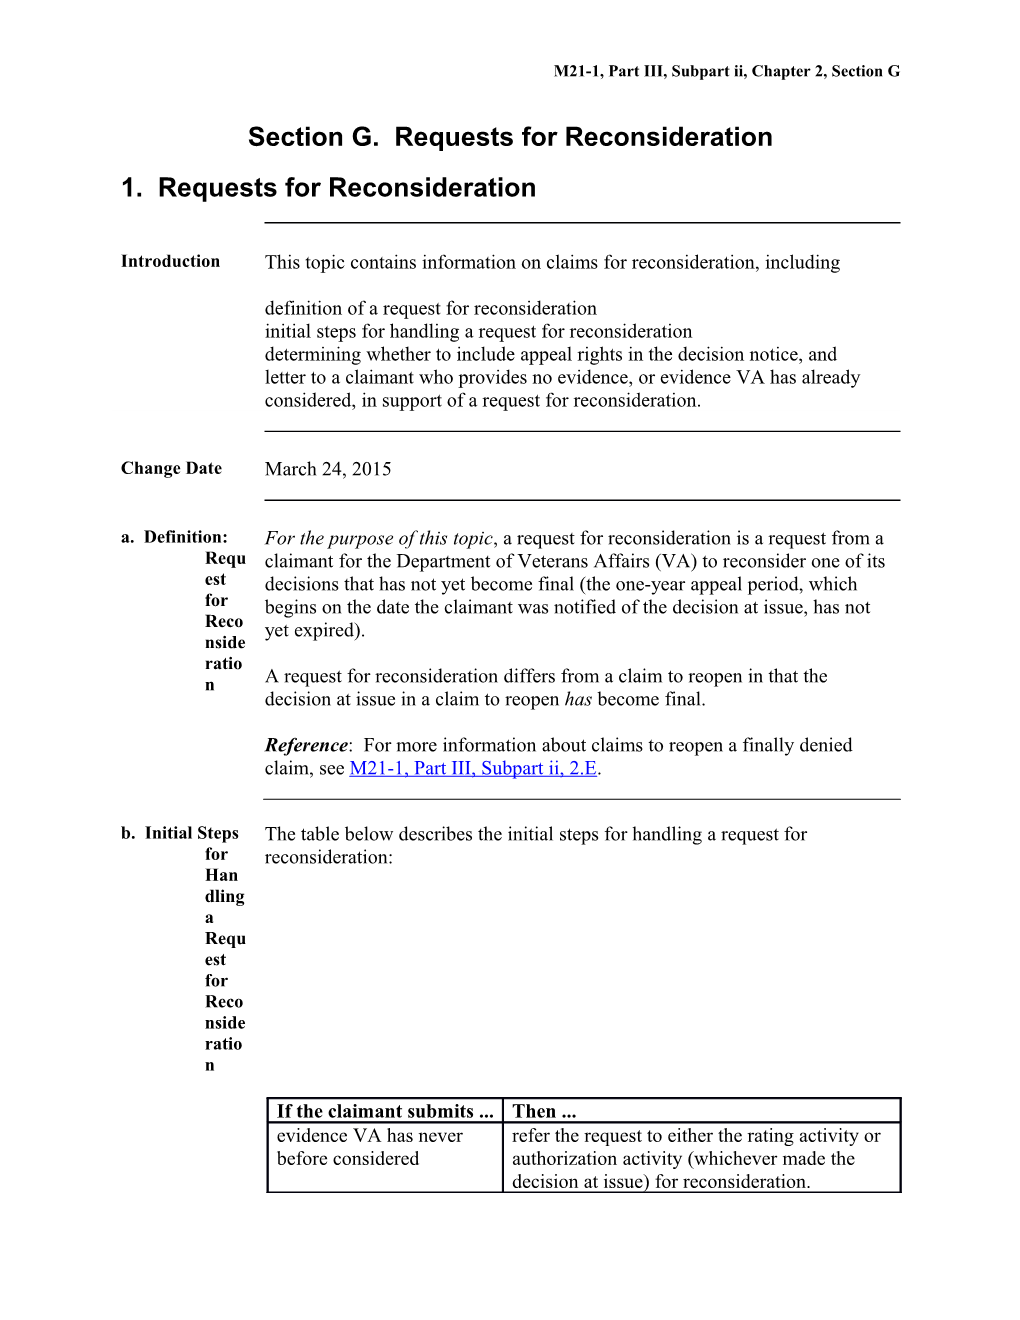 Claims for Reconsideration (U.S. Department of Veterans Affairs)